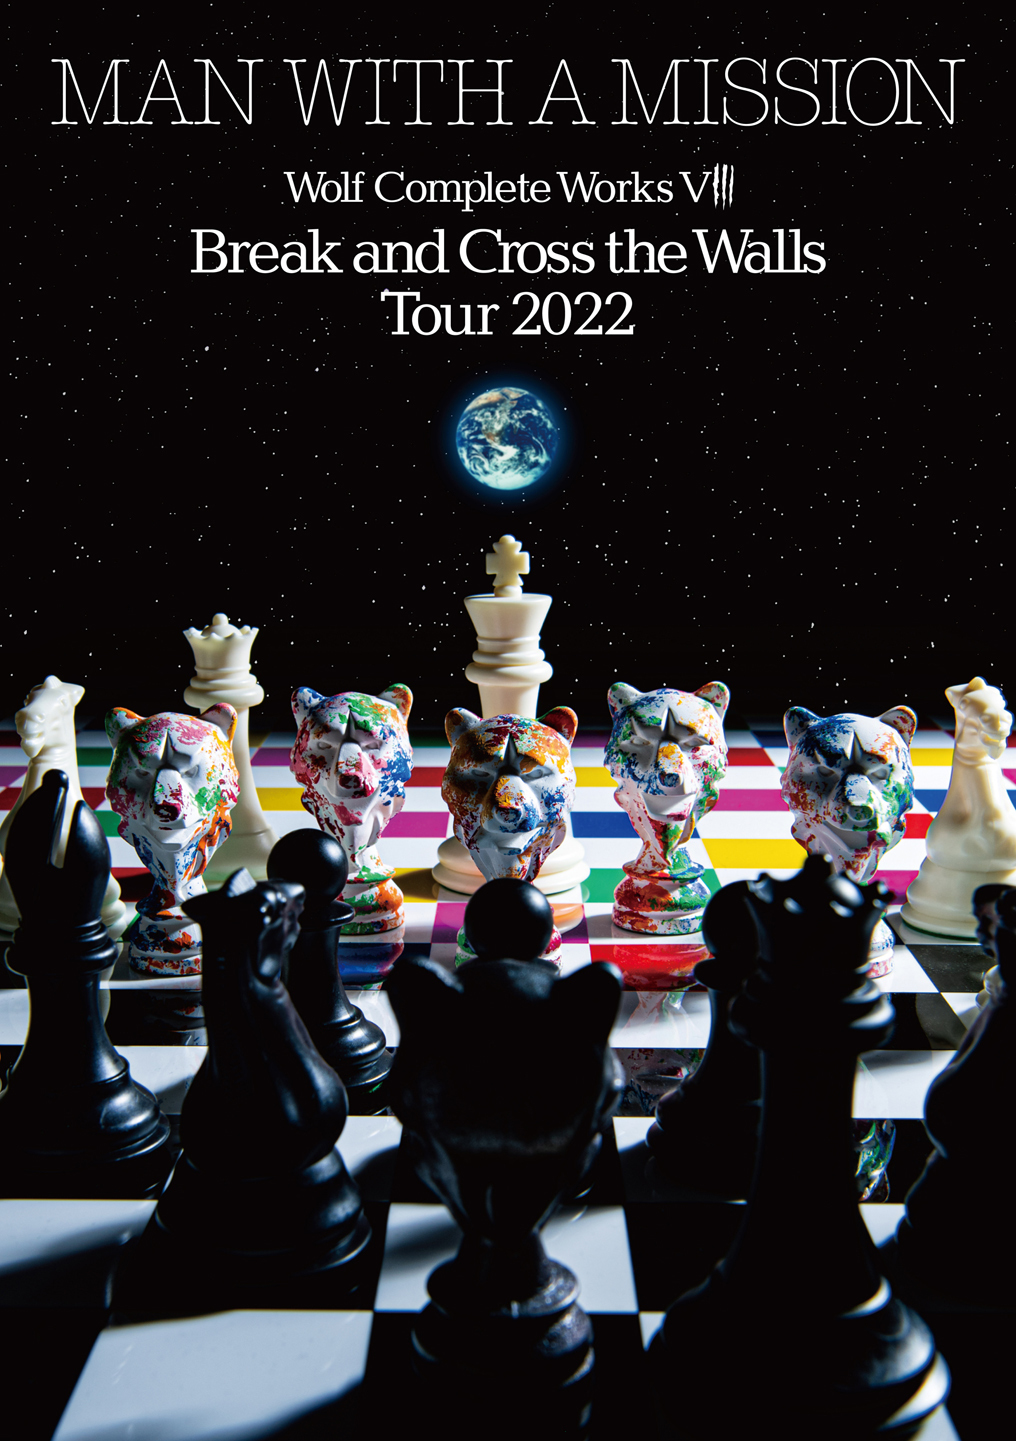 Break and Cross the Walls Tour 2022」声だし解禁の有明アリーナ公演 ...